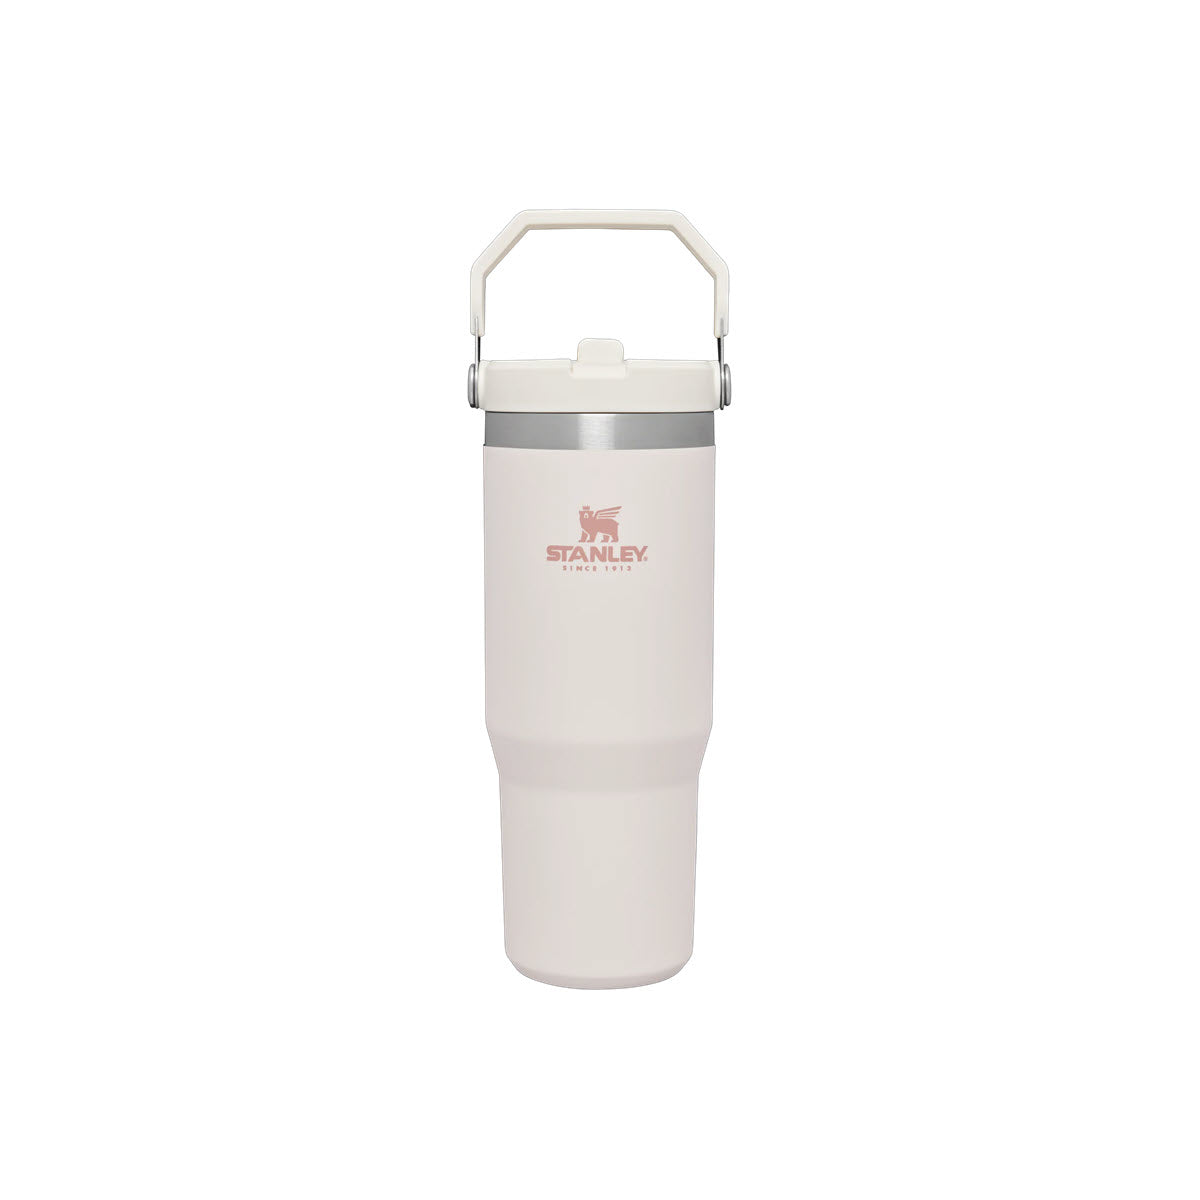 White Stanley IceFlow tumbler 30oz Rose Quartz with double-wall vacuum insulation and a handle, centered on a plain background.